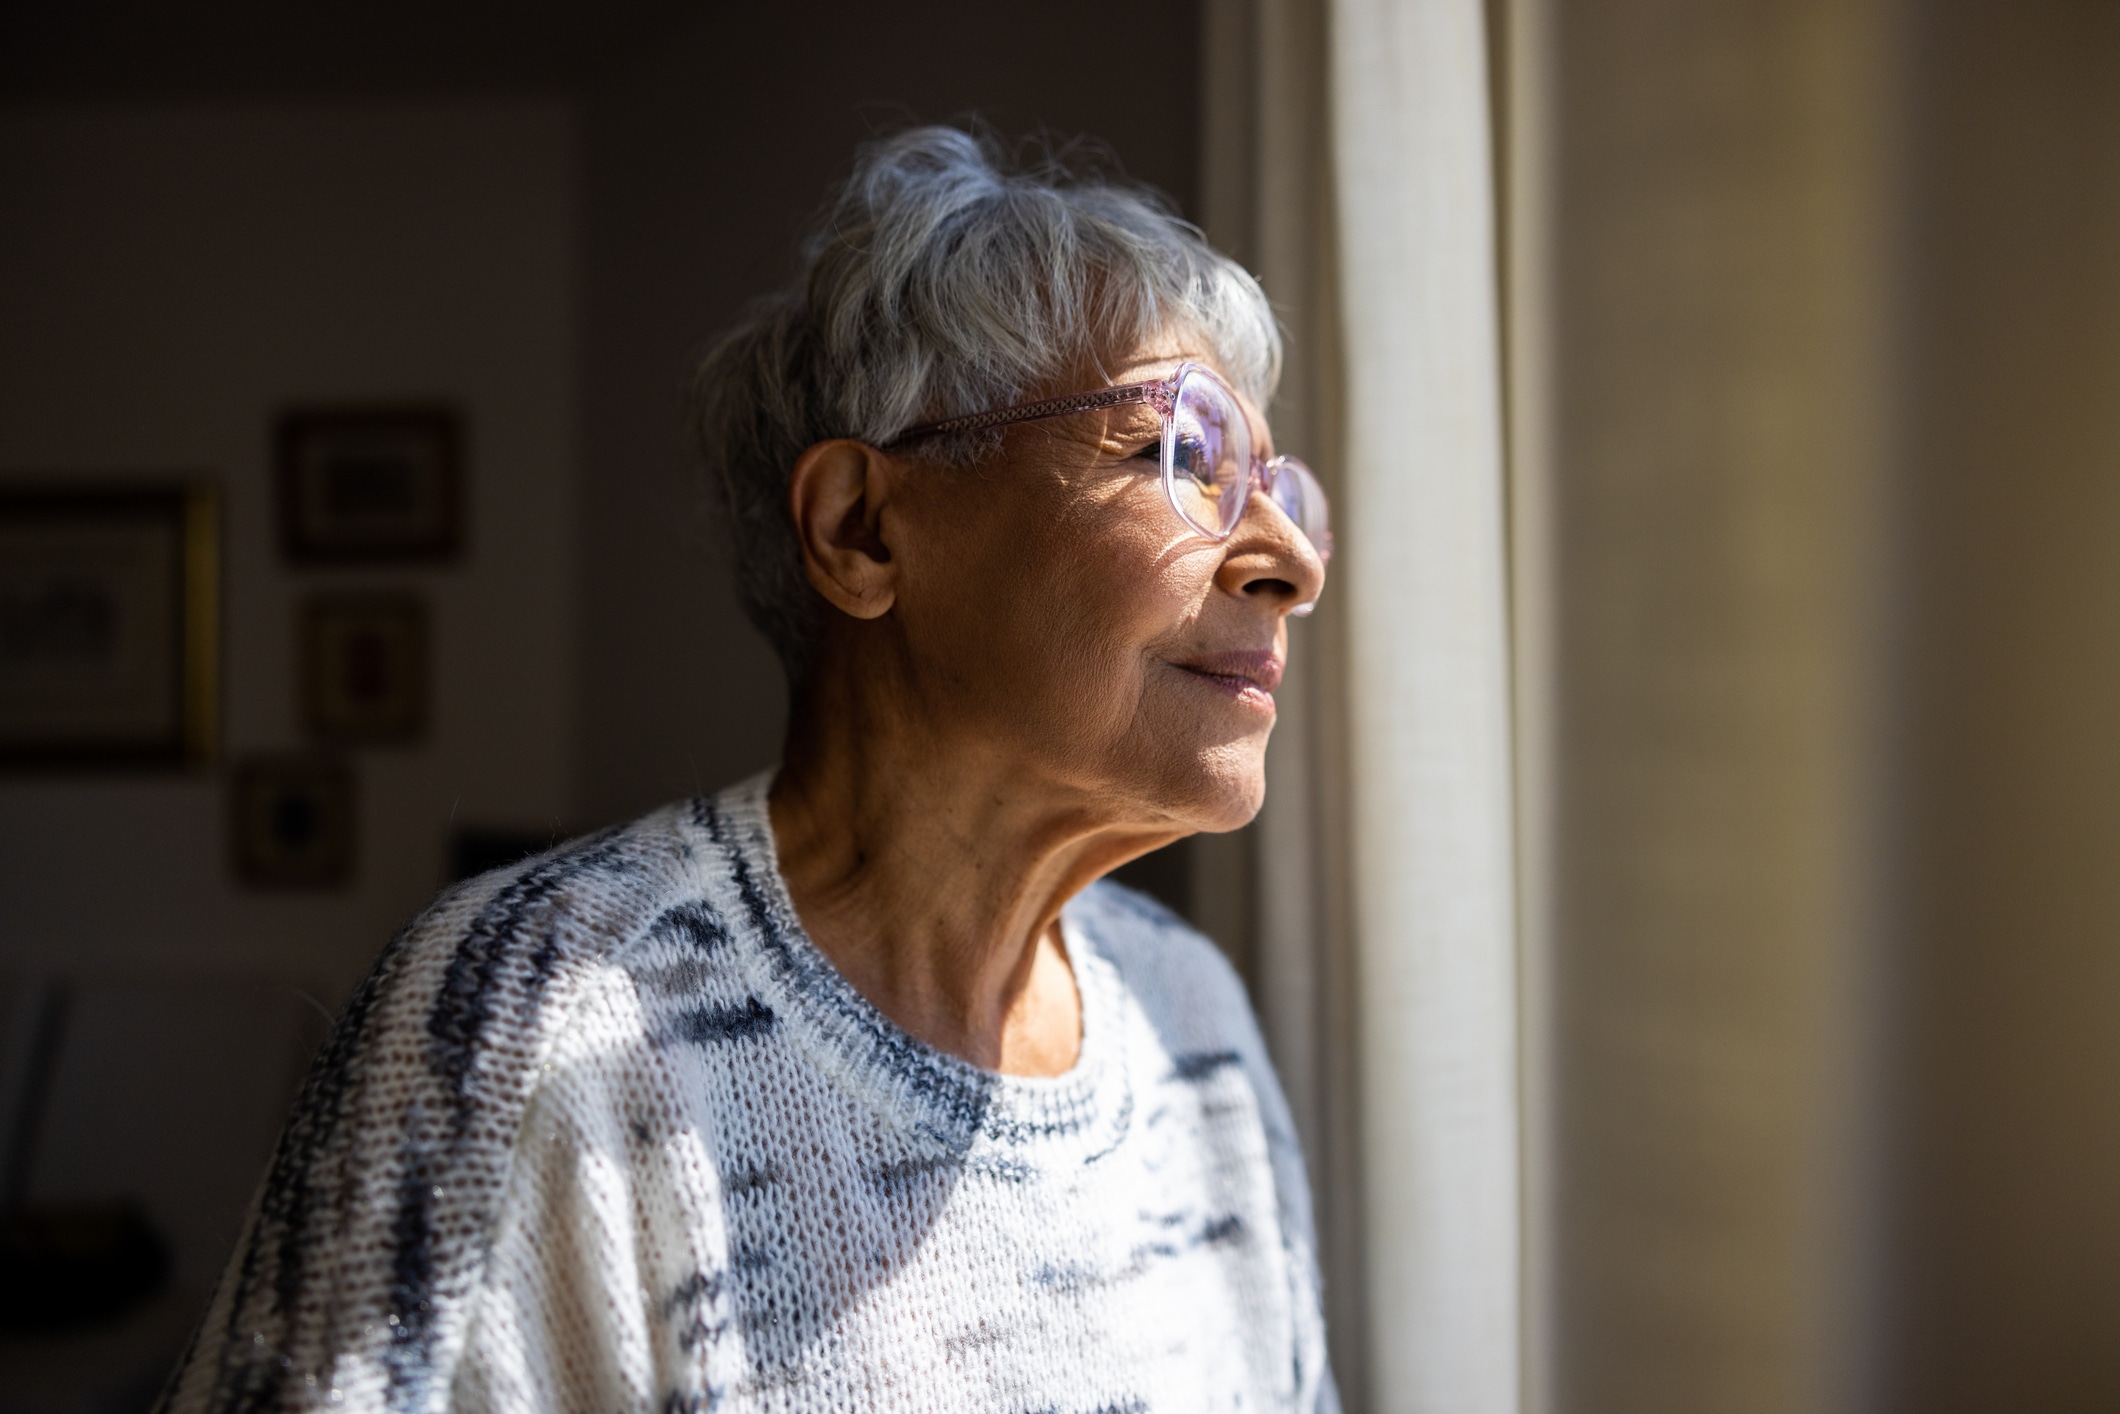 Staying Socially Active: 6 Great Tips for Seniors Battling Loneliness